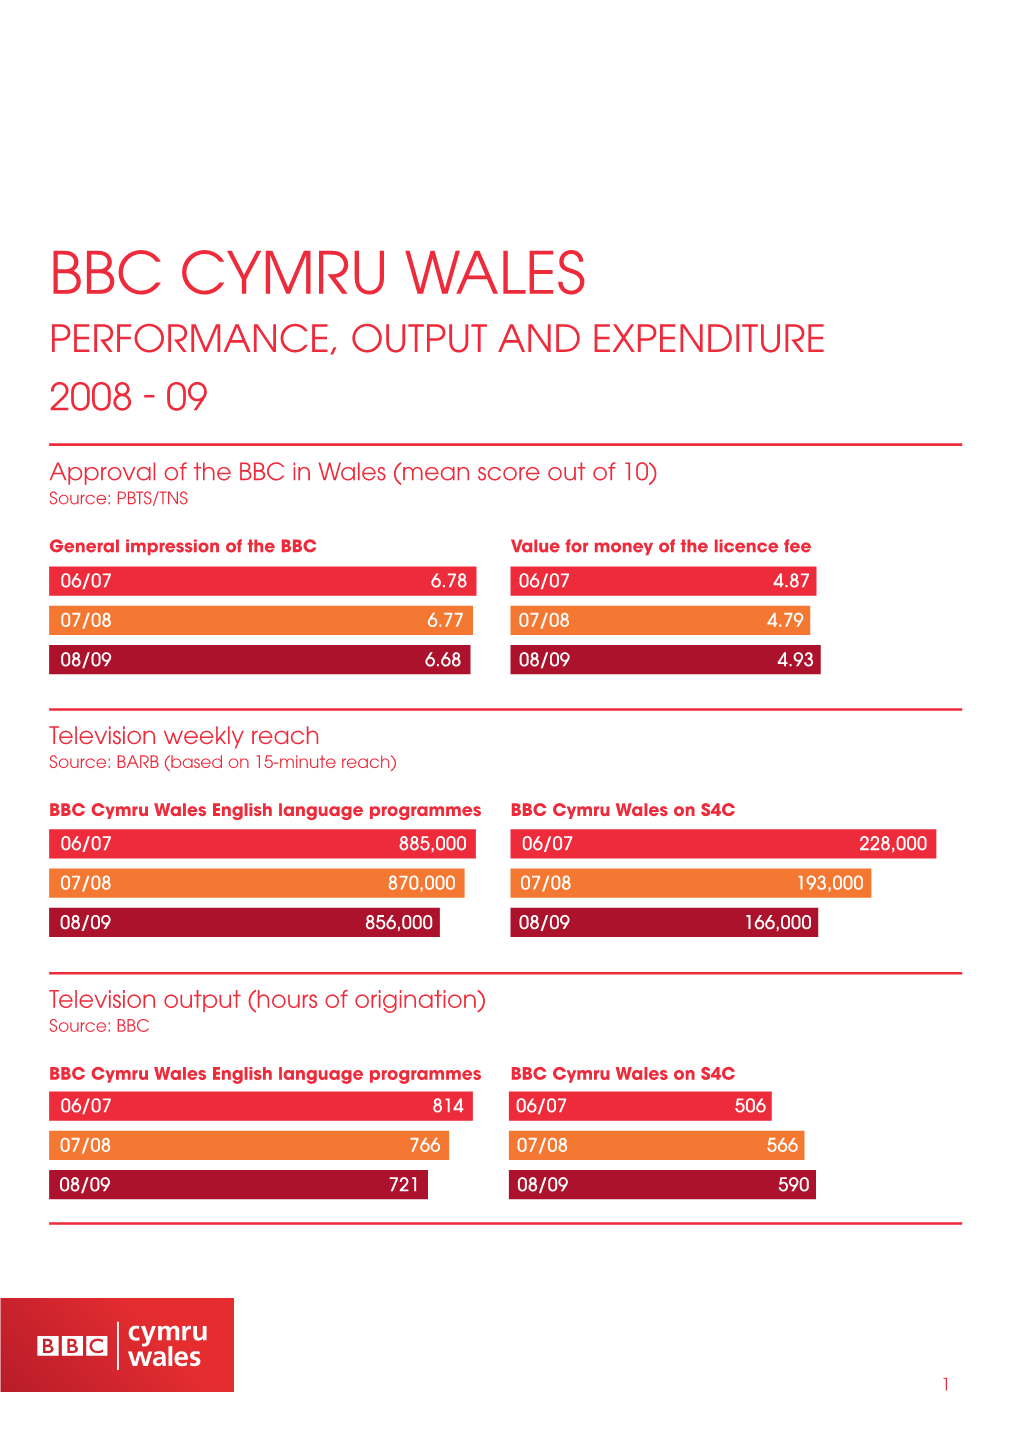 BBC CYMRU WALES Performance, Output and Expenditure 2008 - 09